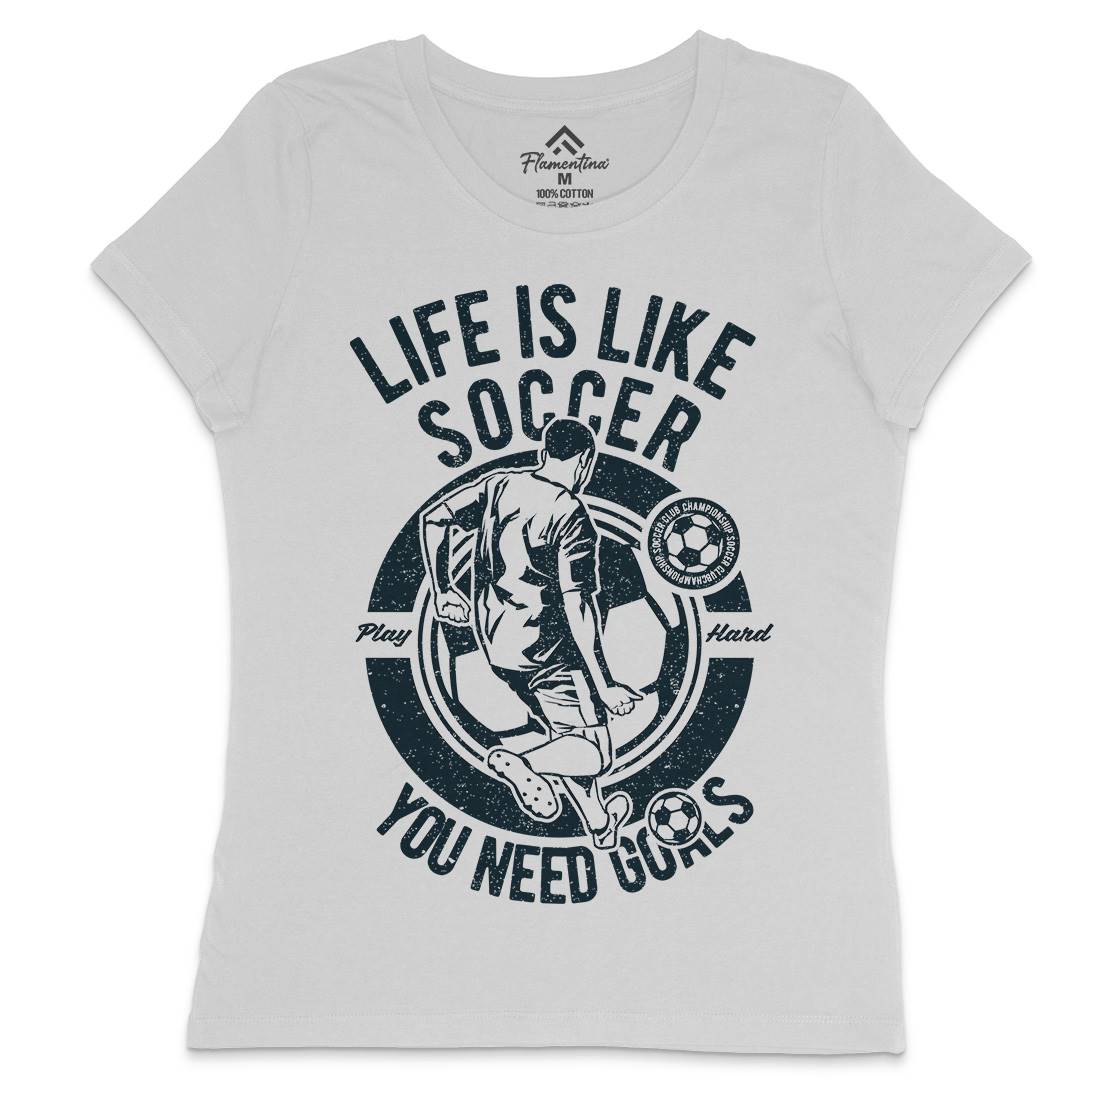 Life Is Like Soccer Womens Crew Neck T-Shirt Sport A707